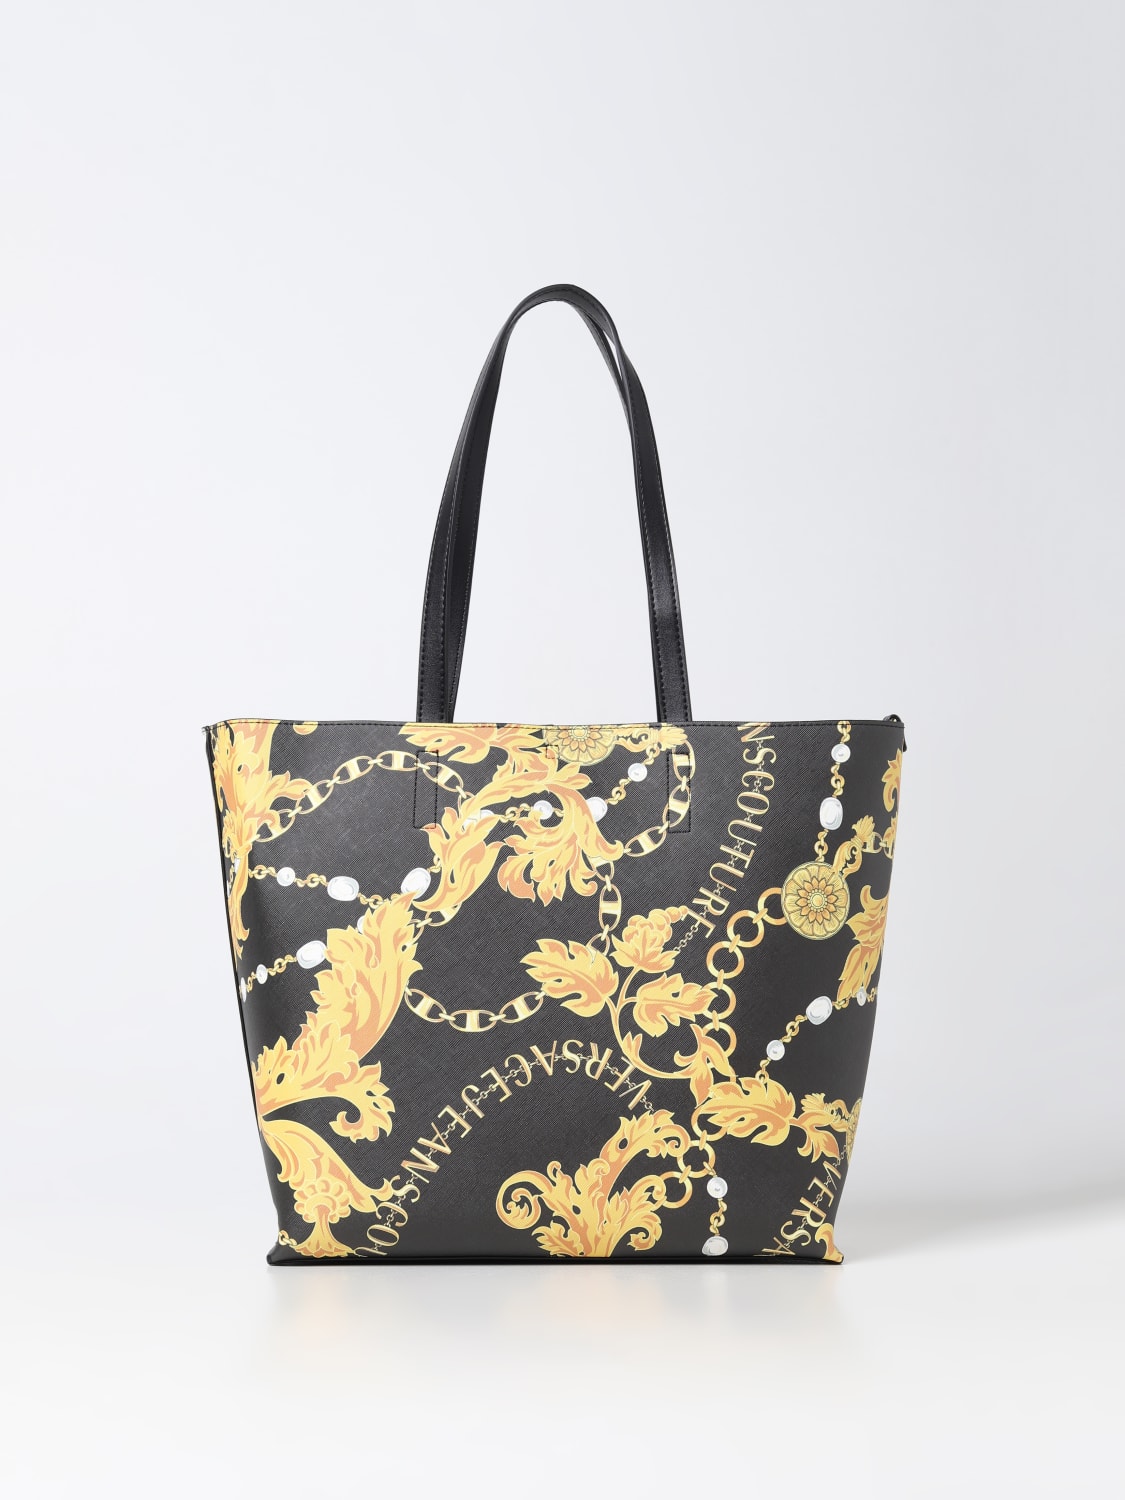 Versace Jeans Couture Tote Bag - Black for Women